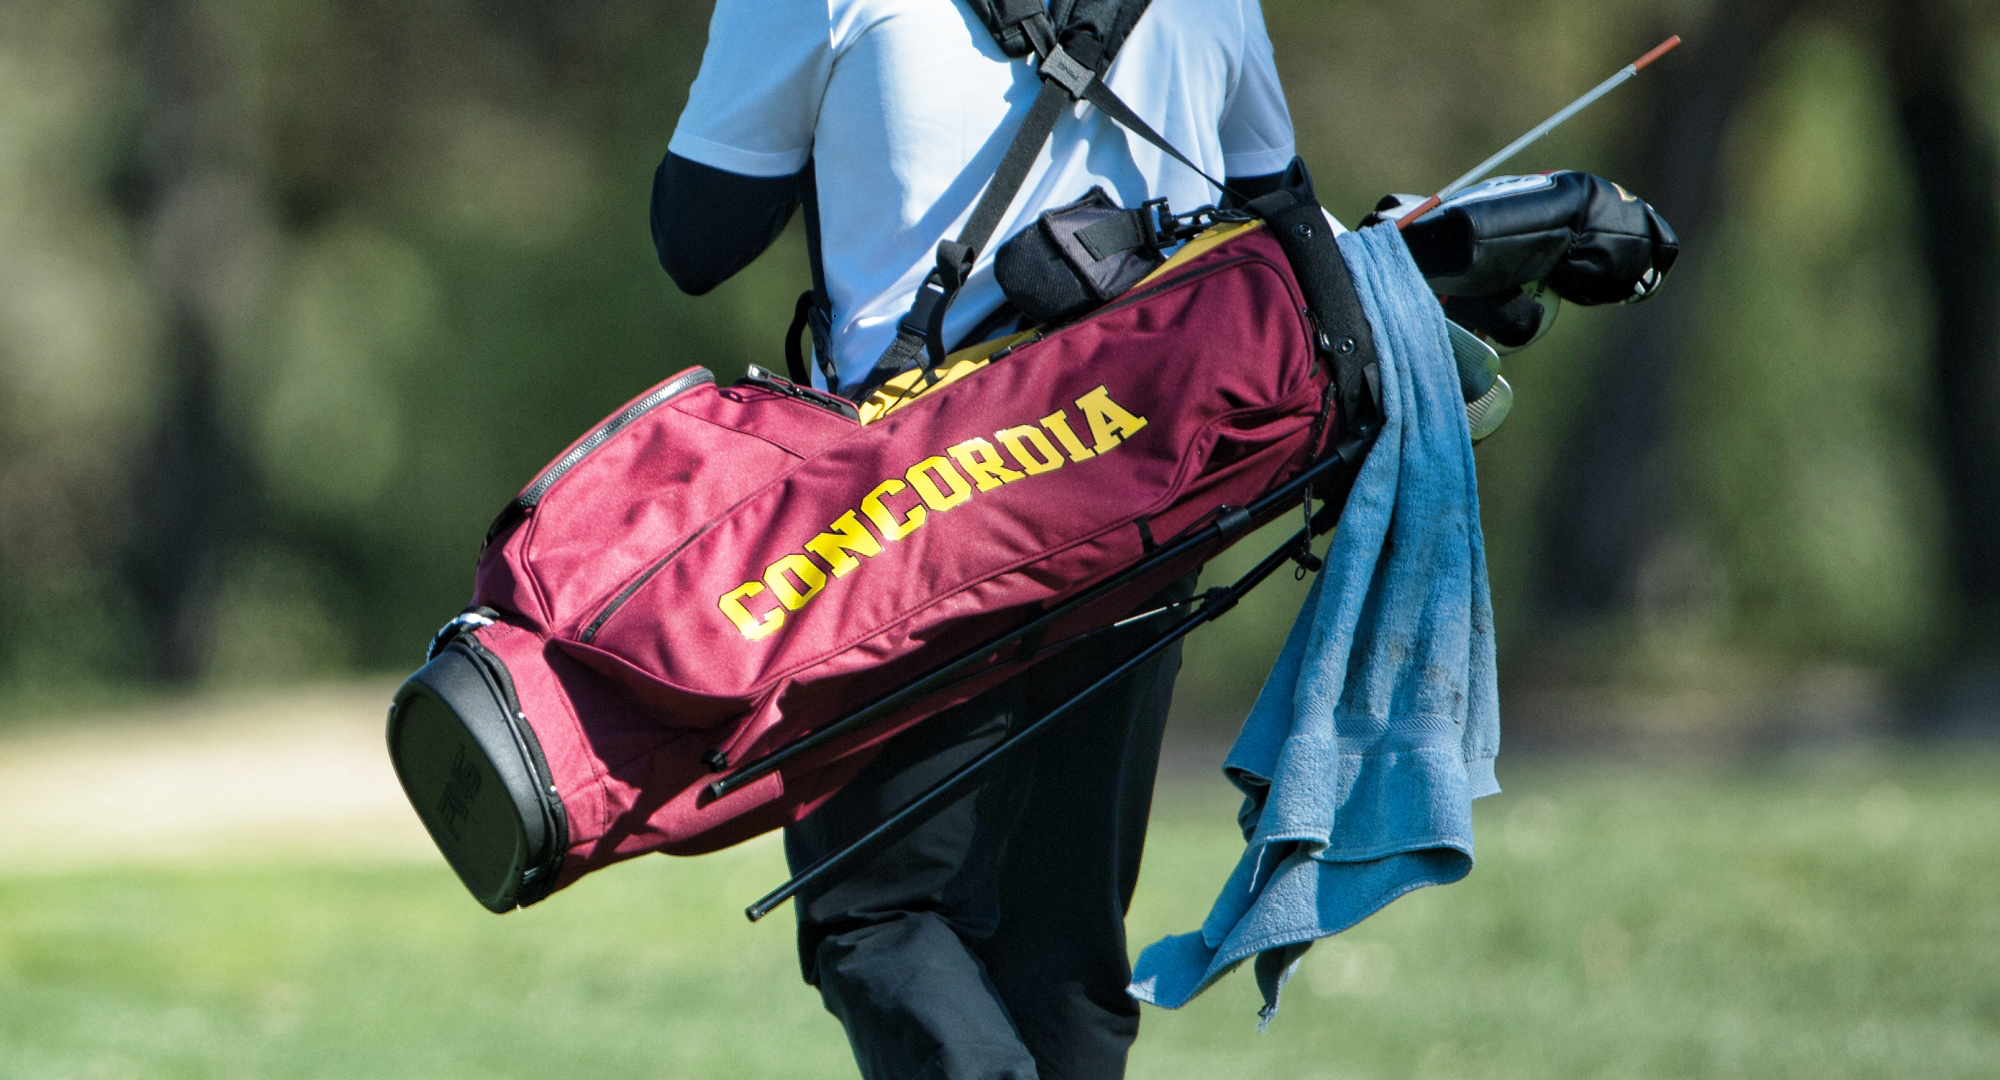 Concordia fired its fourth team total round of under 300 of the season and finished third at the SJU Fall Invite.